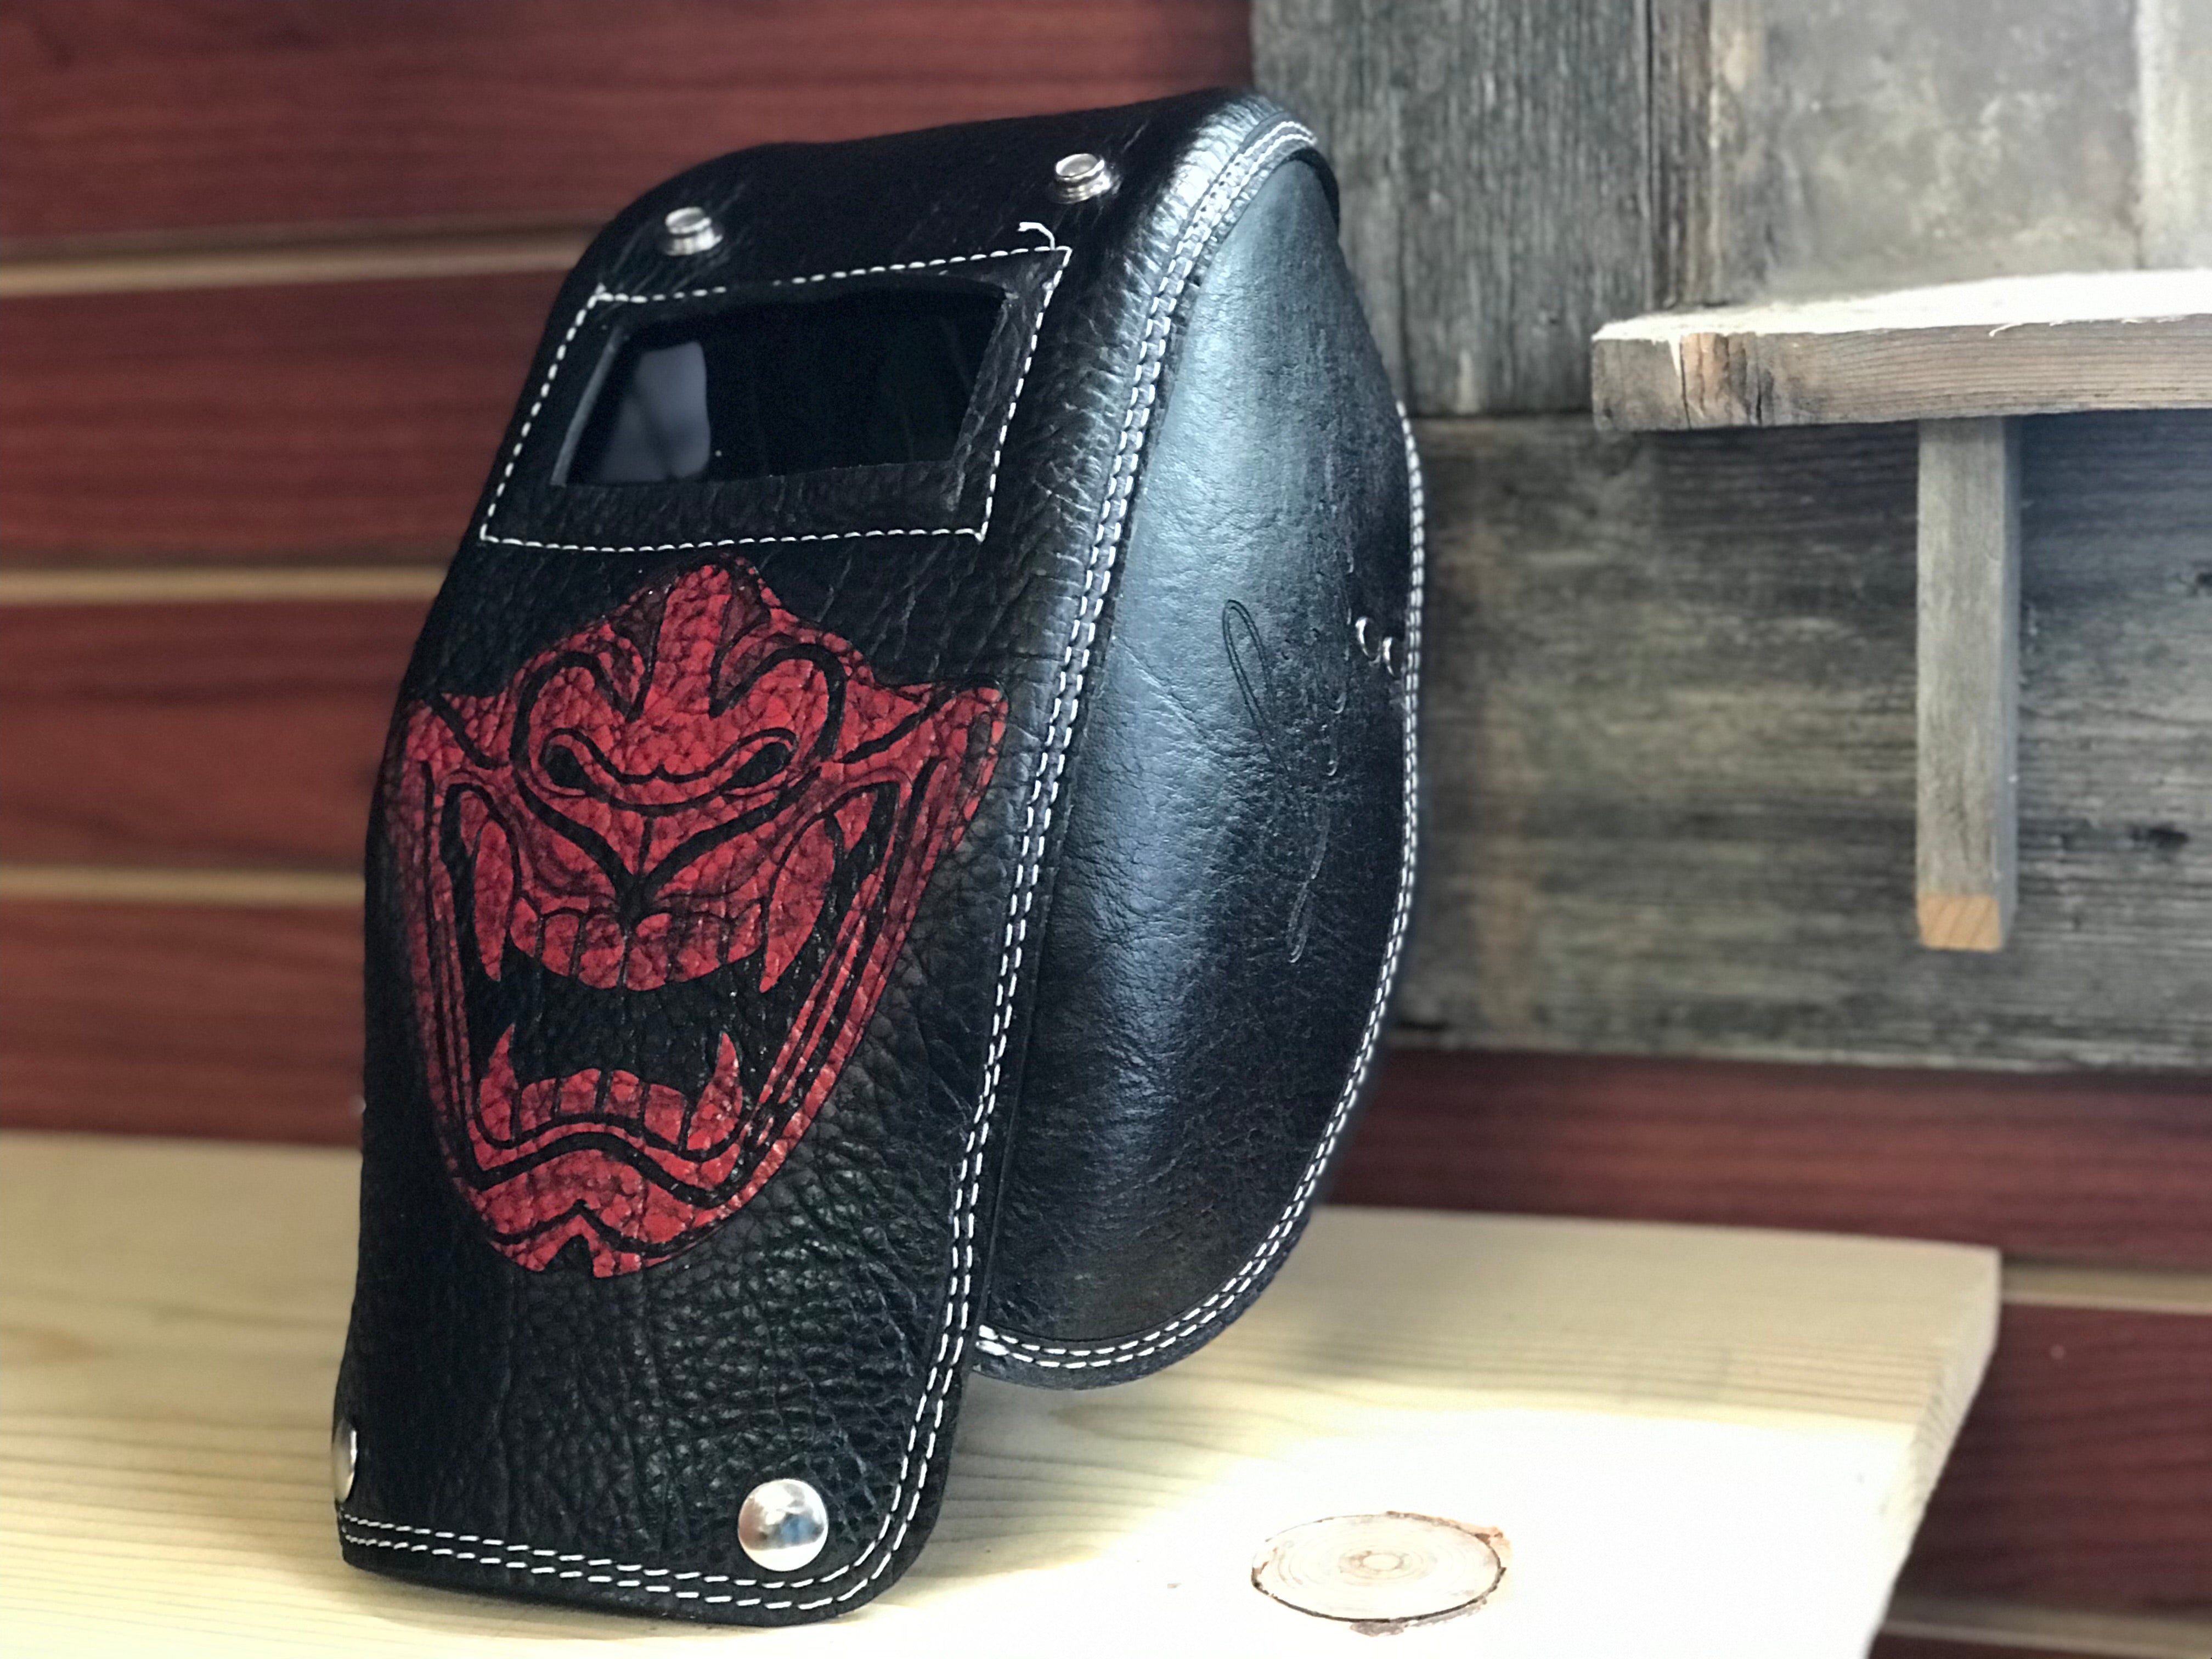 Samurai Pocket Welding Mask  by Outlaw Leather